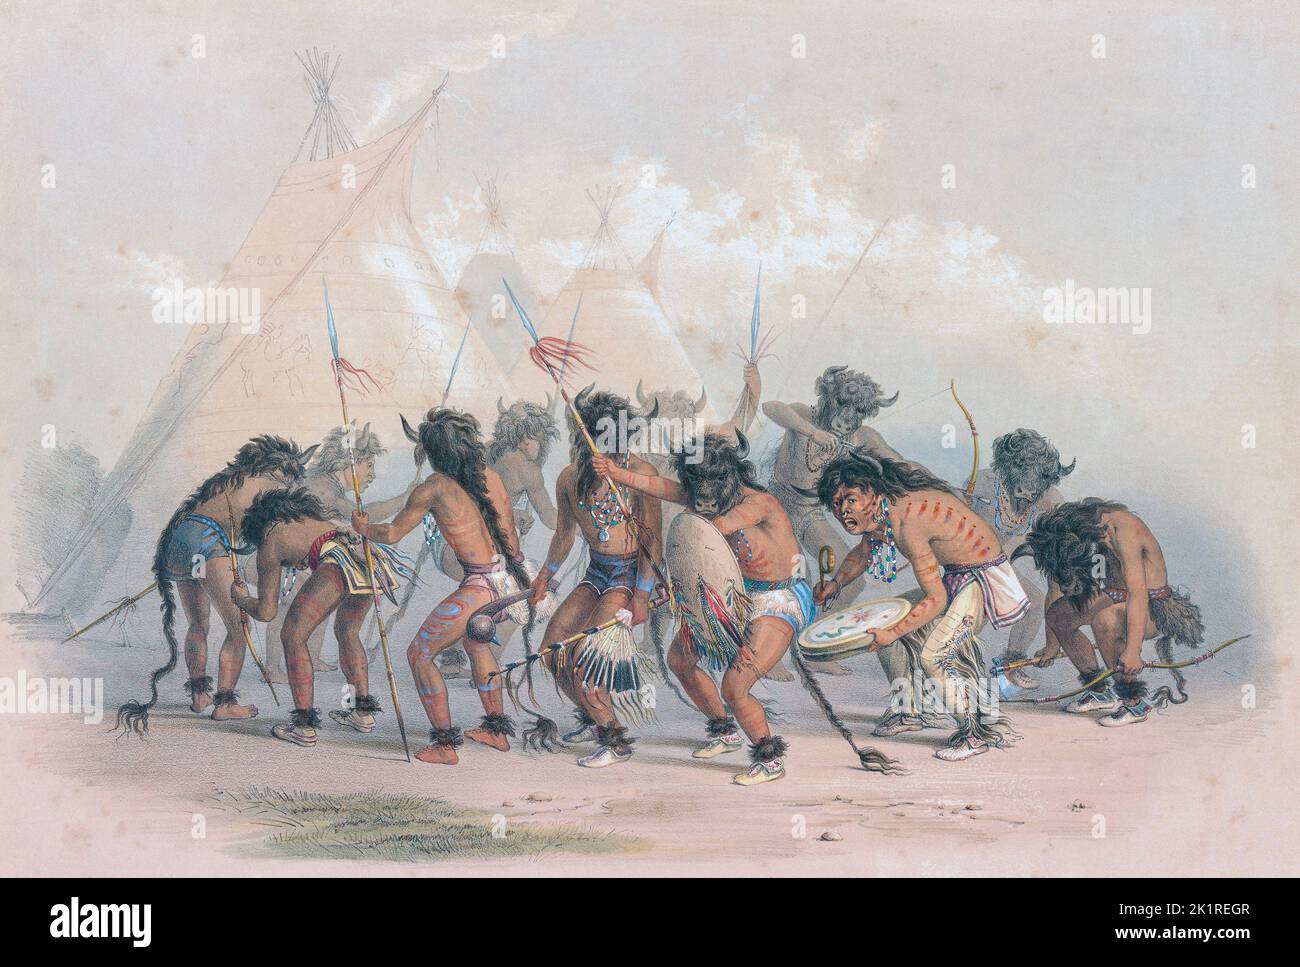 Buffalo Dance.  Or Bison Dance.  Many  North American Plains Indians performed this ceremony which normally coincided with the annual return of the buffalo herds upon which the Indians were dependent for food and resources.  From Catlin's North American Indian Portfolio, published in London 1844 by the artist, American adventurer George Catlin, 1796 - 1872.  During many journeys Catlin recorded with pen and brush the customs and life-styles of Native American tribes. Stock Photo